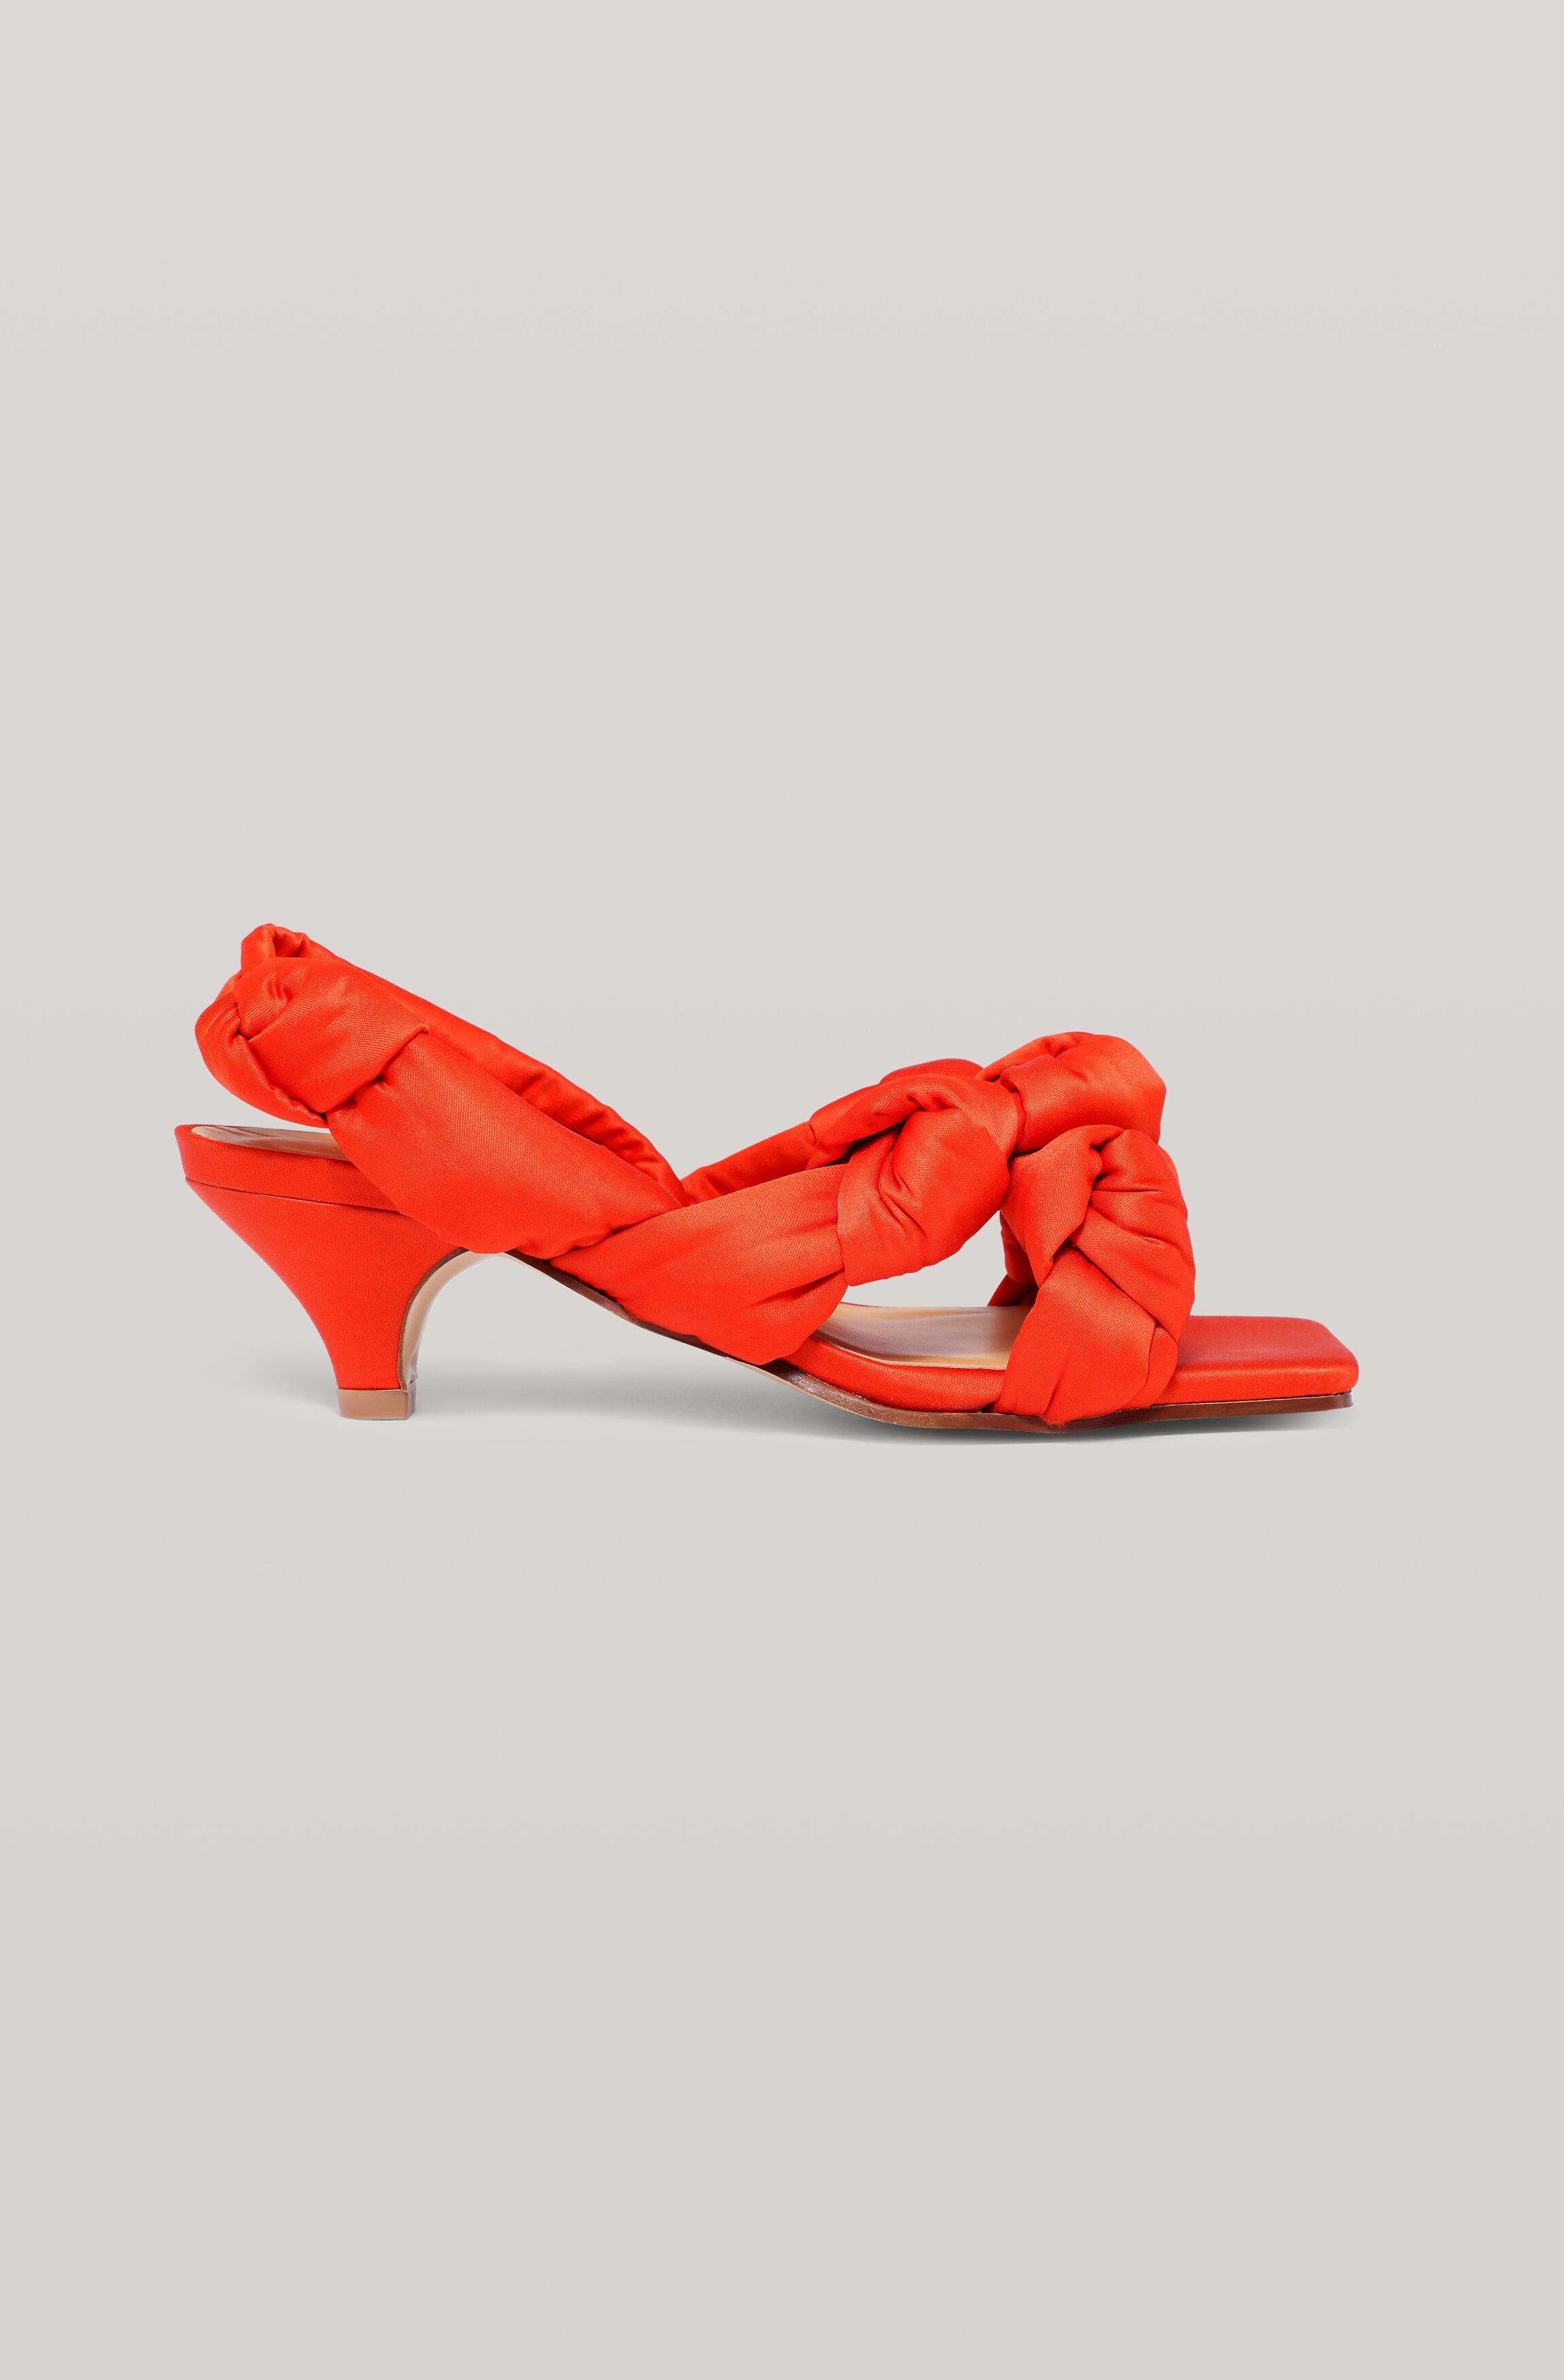 Ganni Recycled Satin Kitten Heel Knot Sandal Flame Size 39 in Red | Lyst